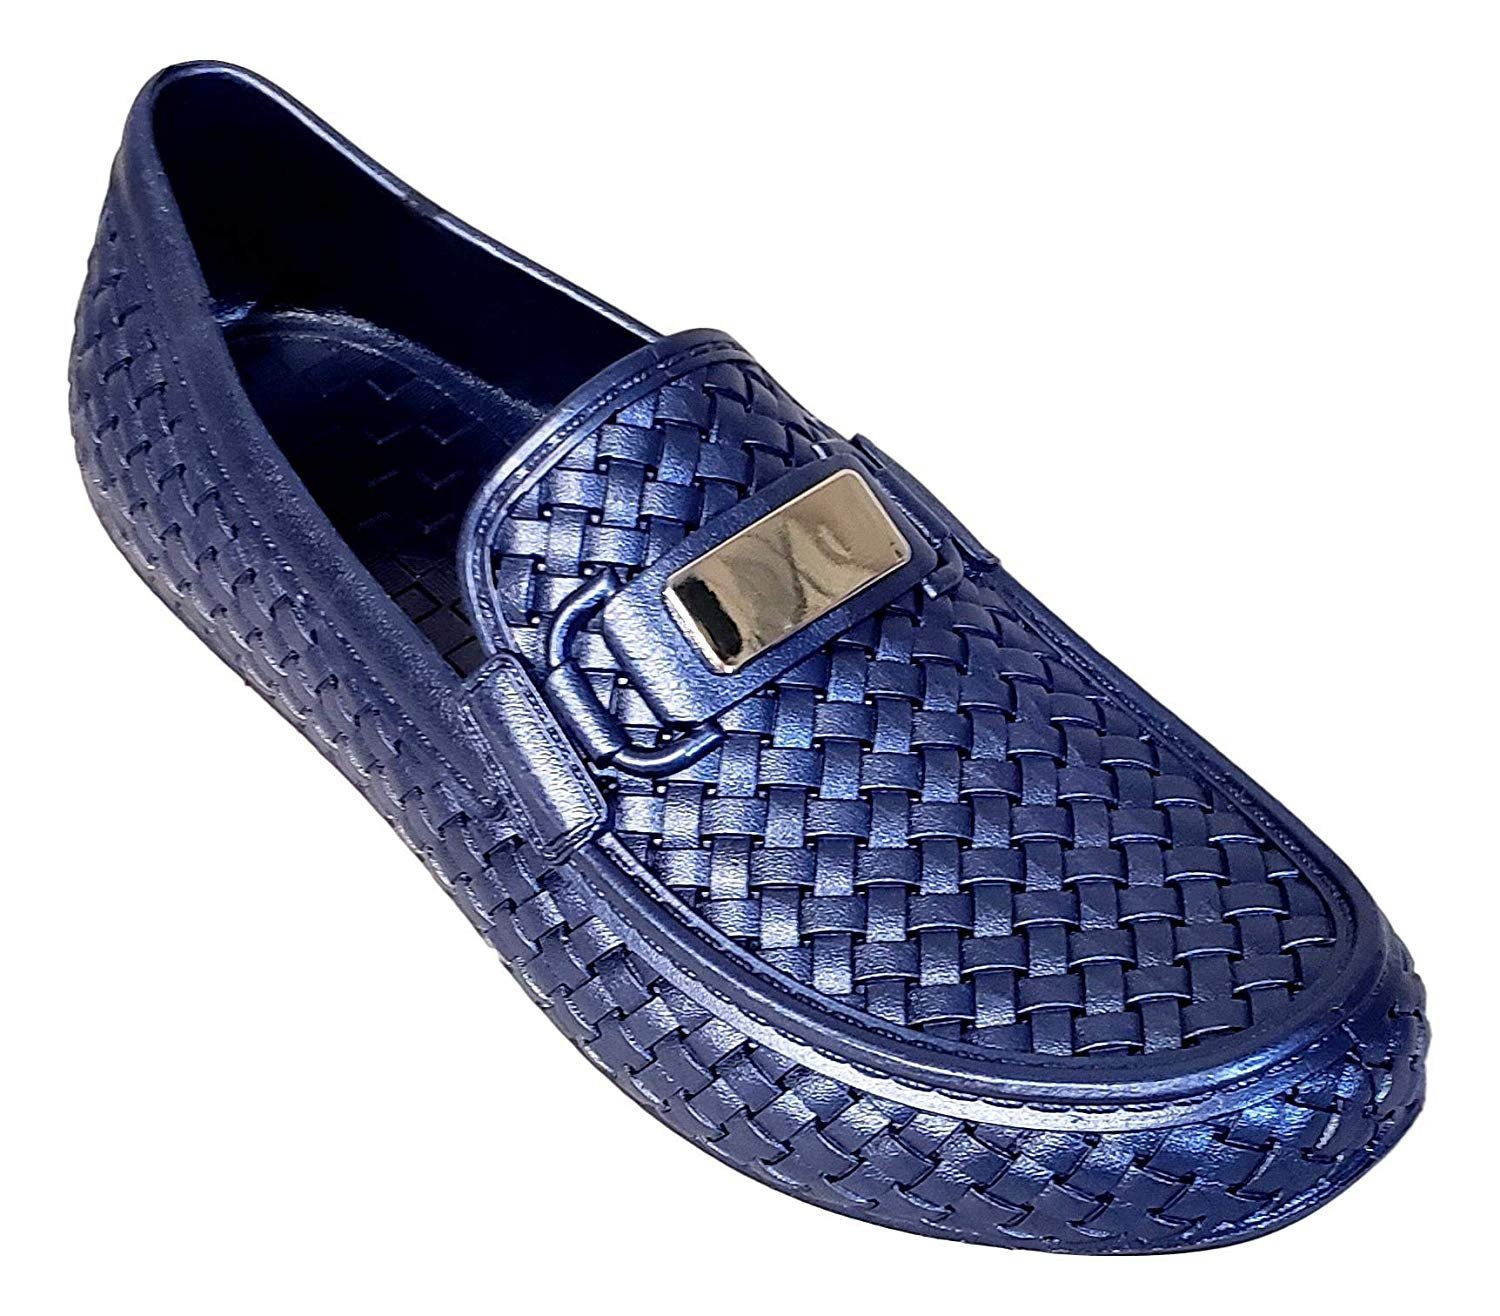 Mens Water Shoe Floater Loafers Classic Look Drivers 7 US M Mens, Blue - image 5 of 7